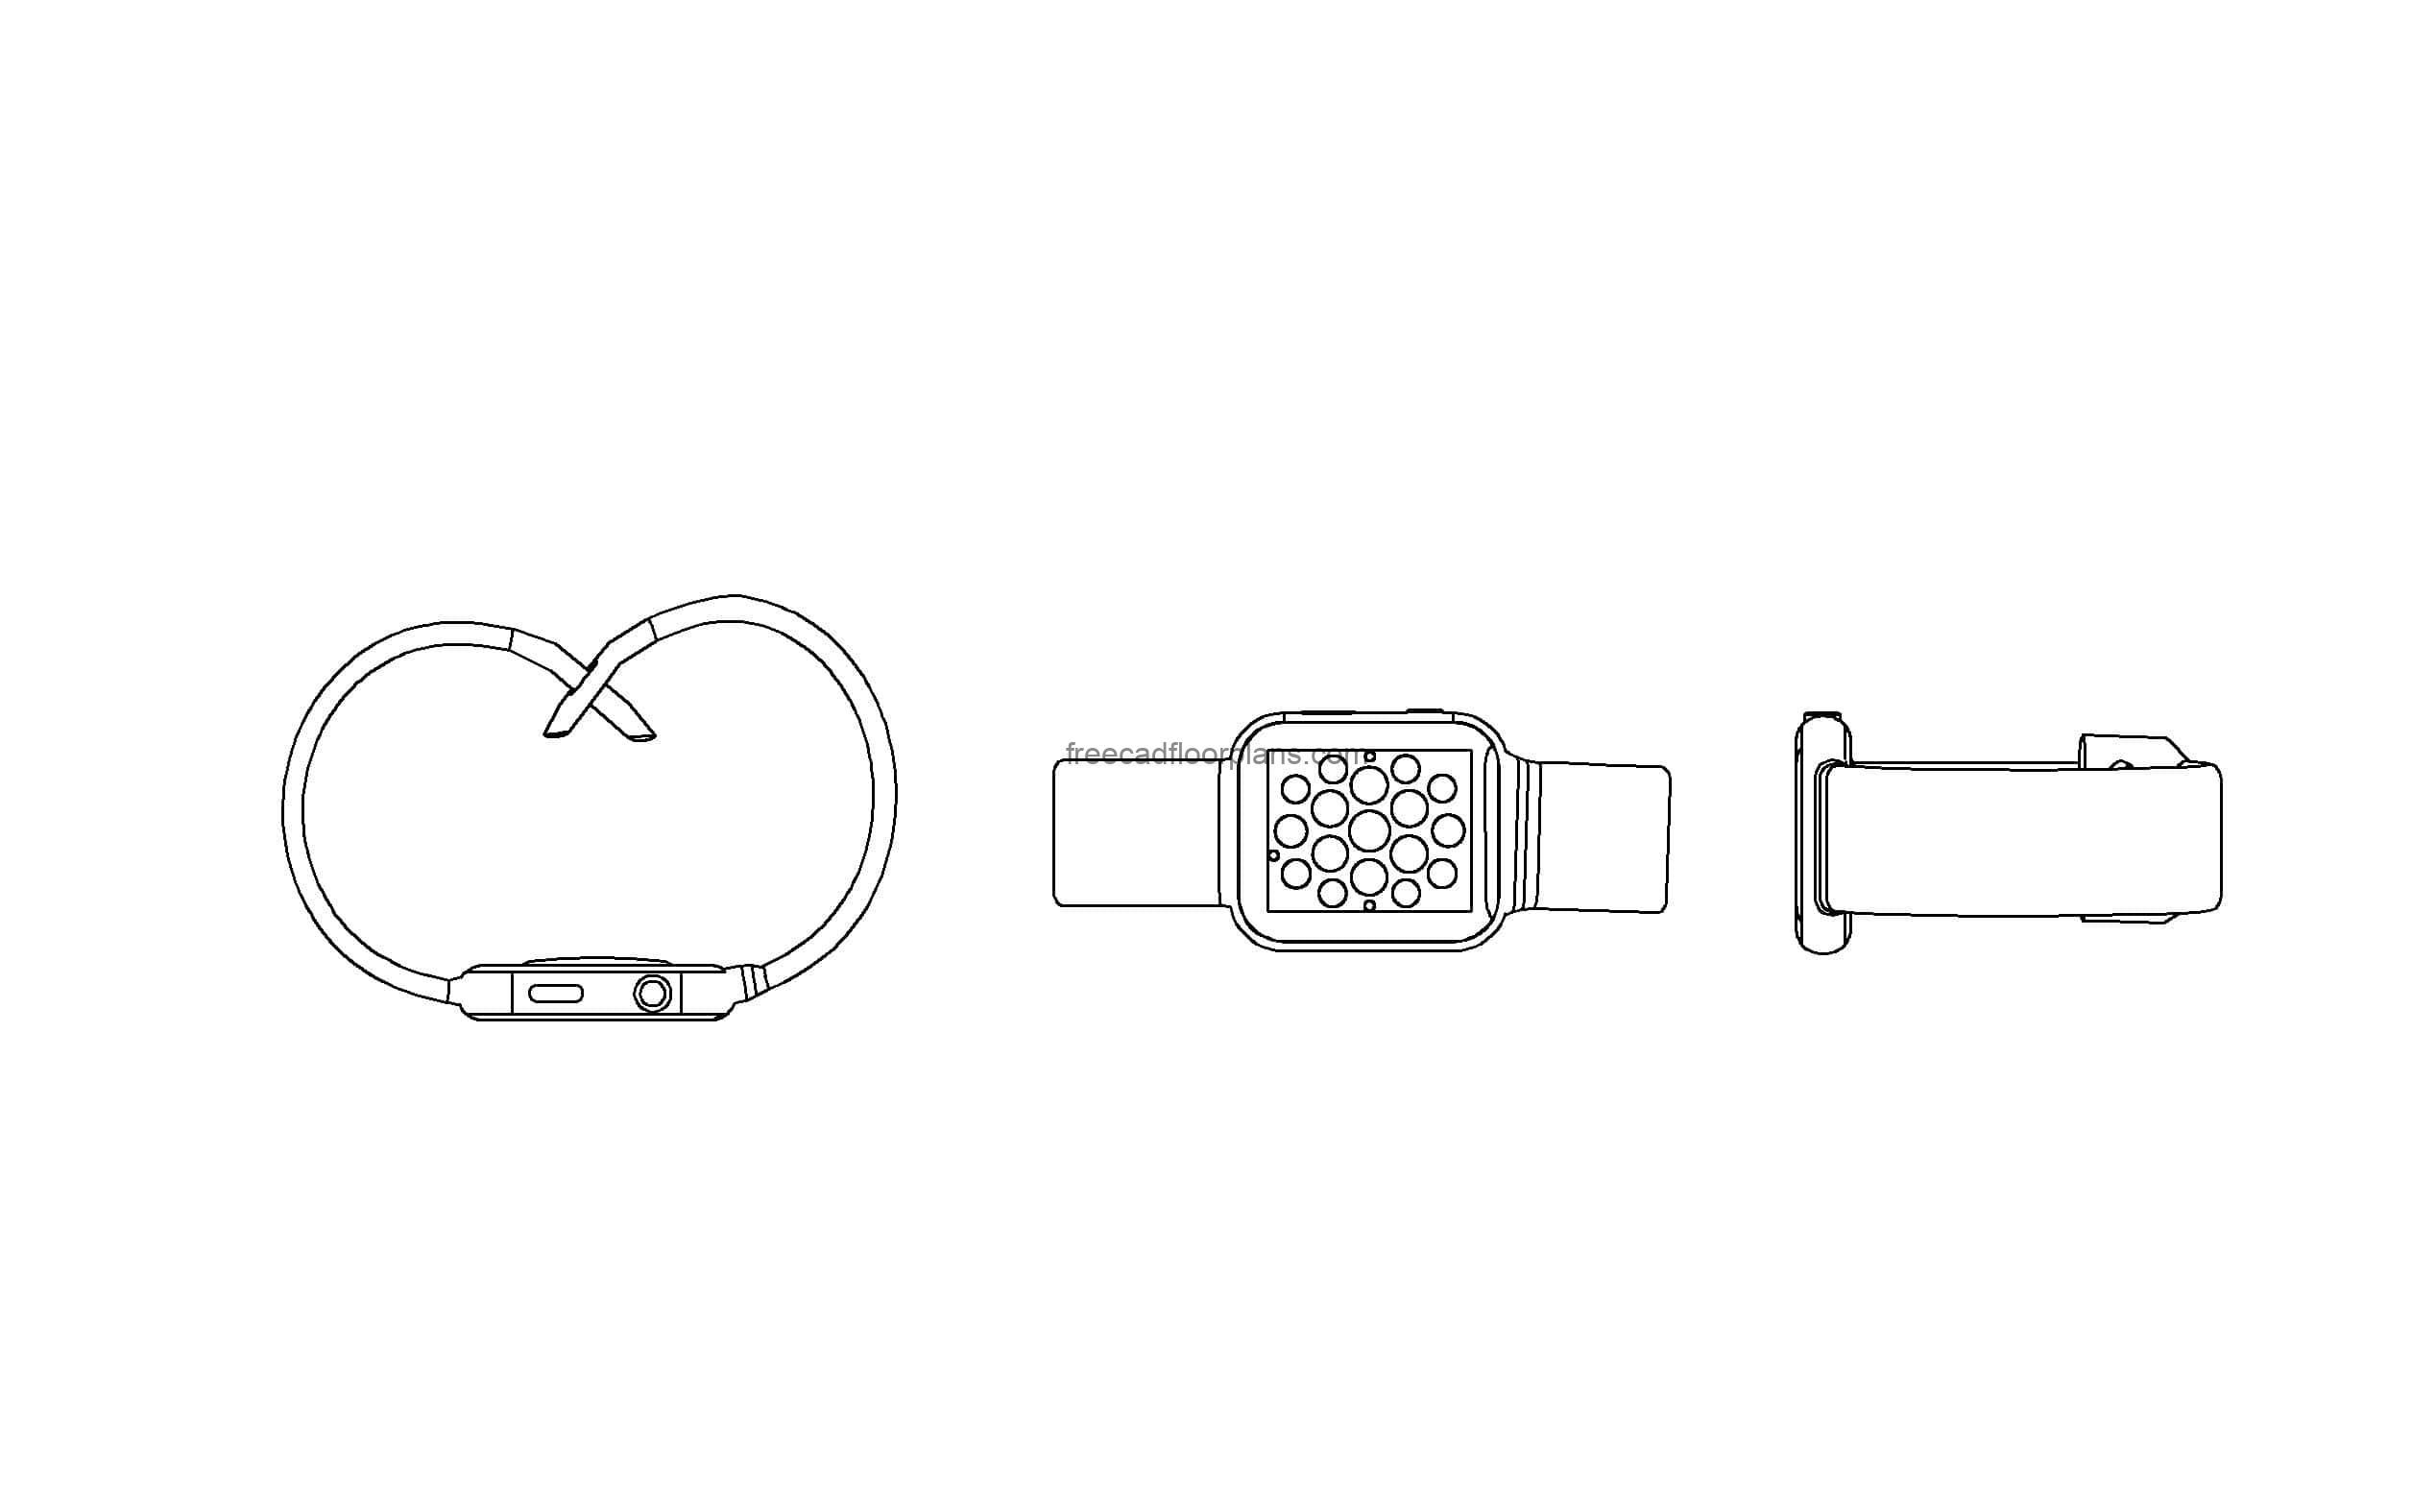 autocad drawing of an apple watch, plan and elevation 2d views, dwg file free for download